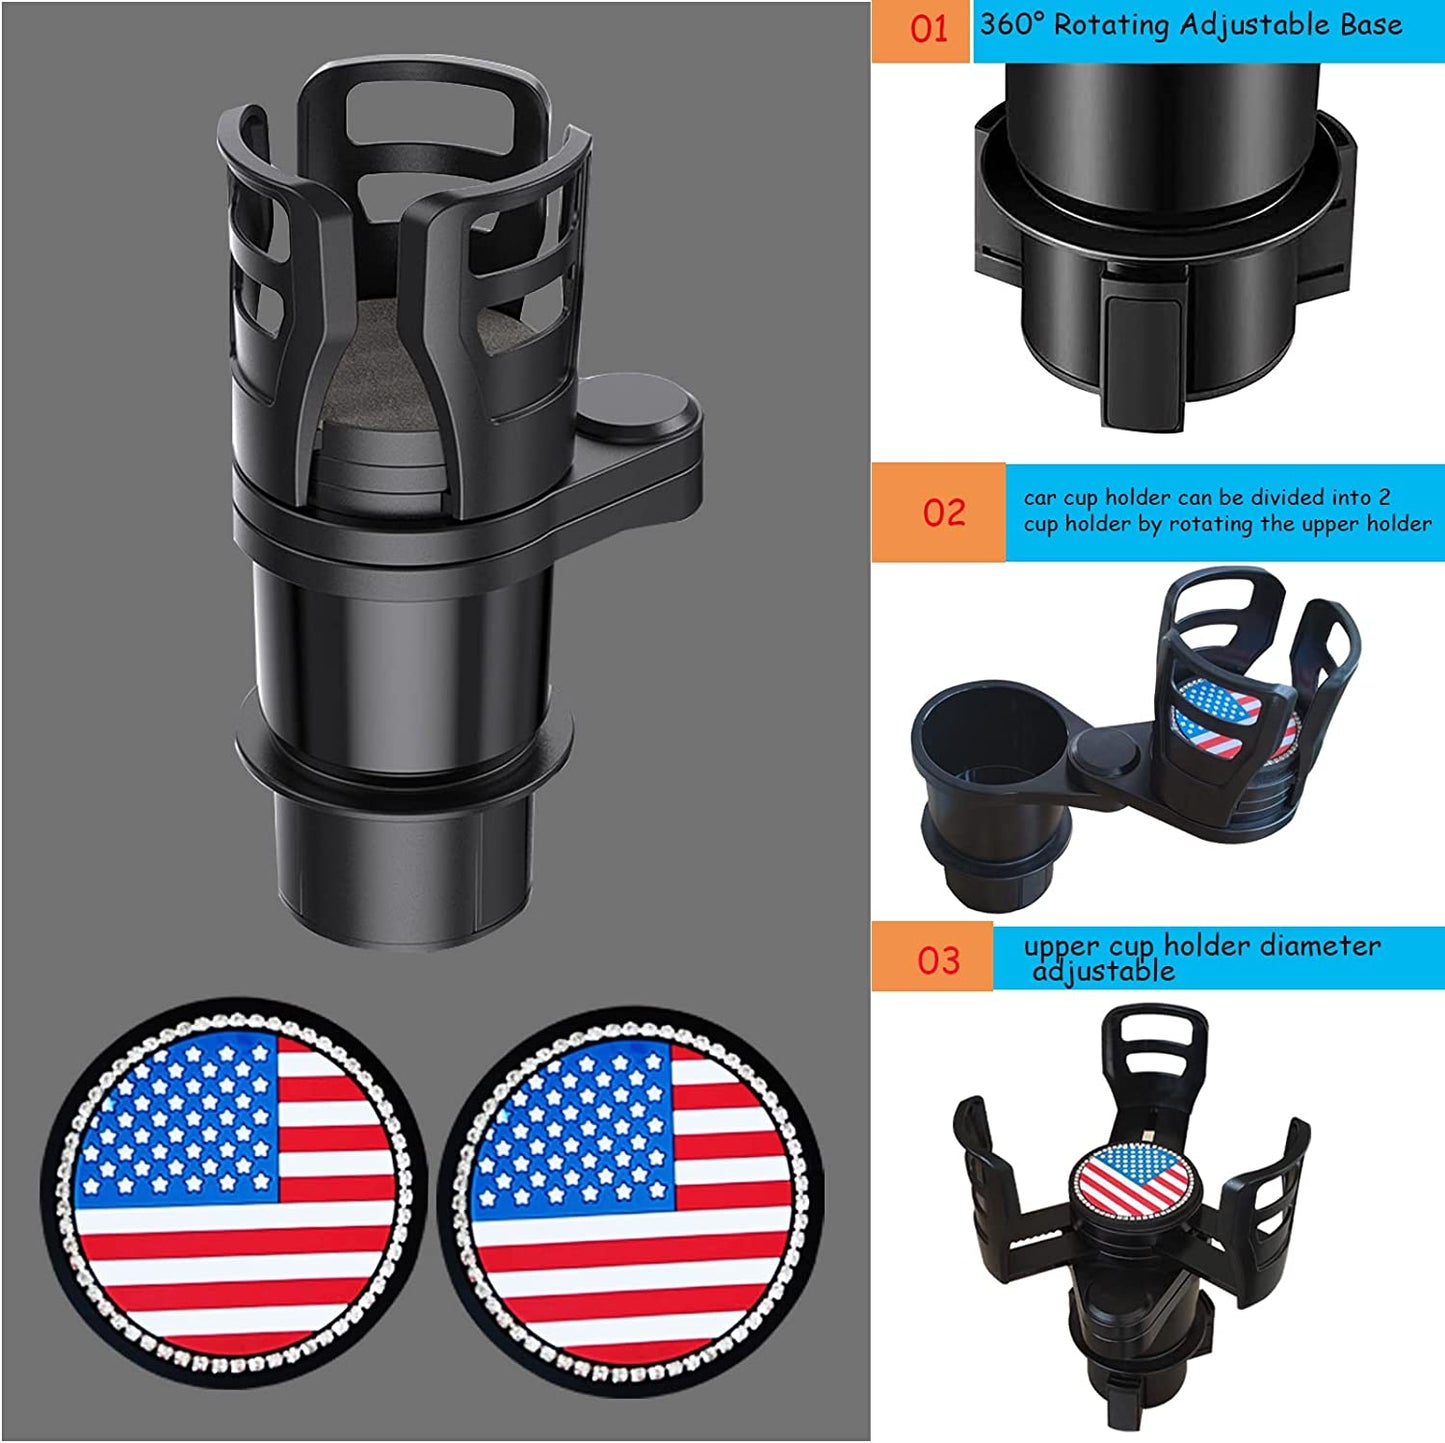 Car Cup Holder Expander, 2 in 1 Multifunctional Vehicle Mounted Cup Holder Extender with Adjustable Base, 360°Rotating Dual Cup Holder Adapter Universal Insert Car Cup Holders with Free Coasters